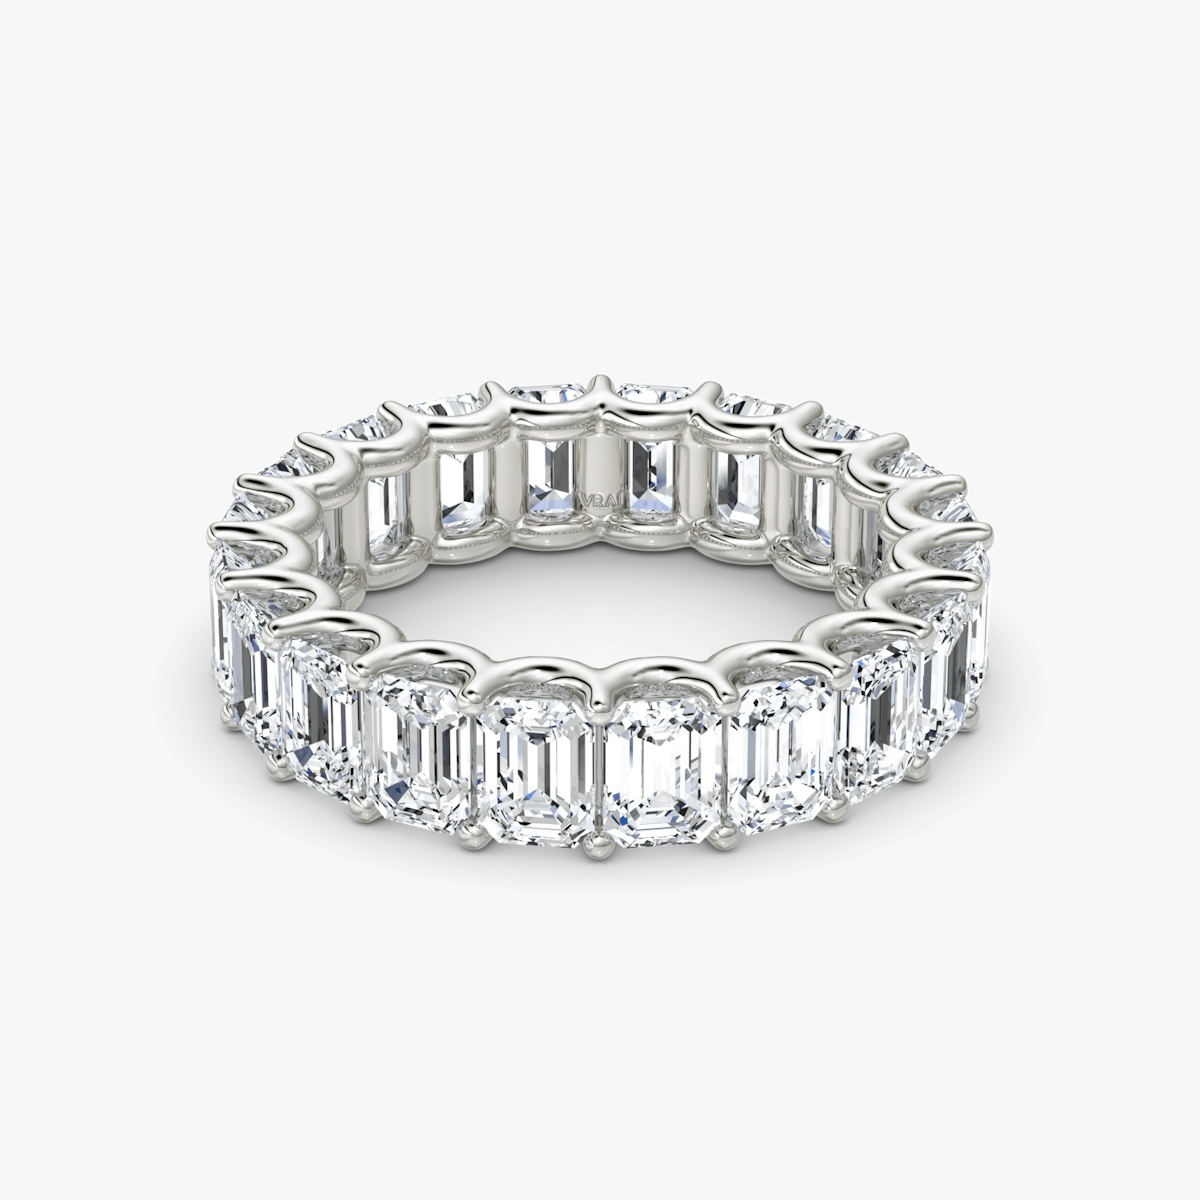 The Eternity Band Emerald Wedding Band in White Gold | VRAI